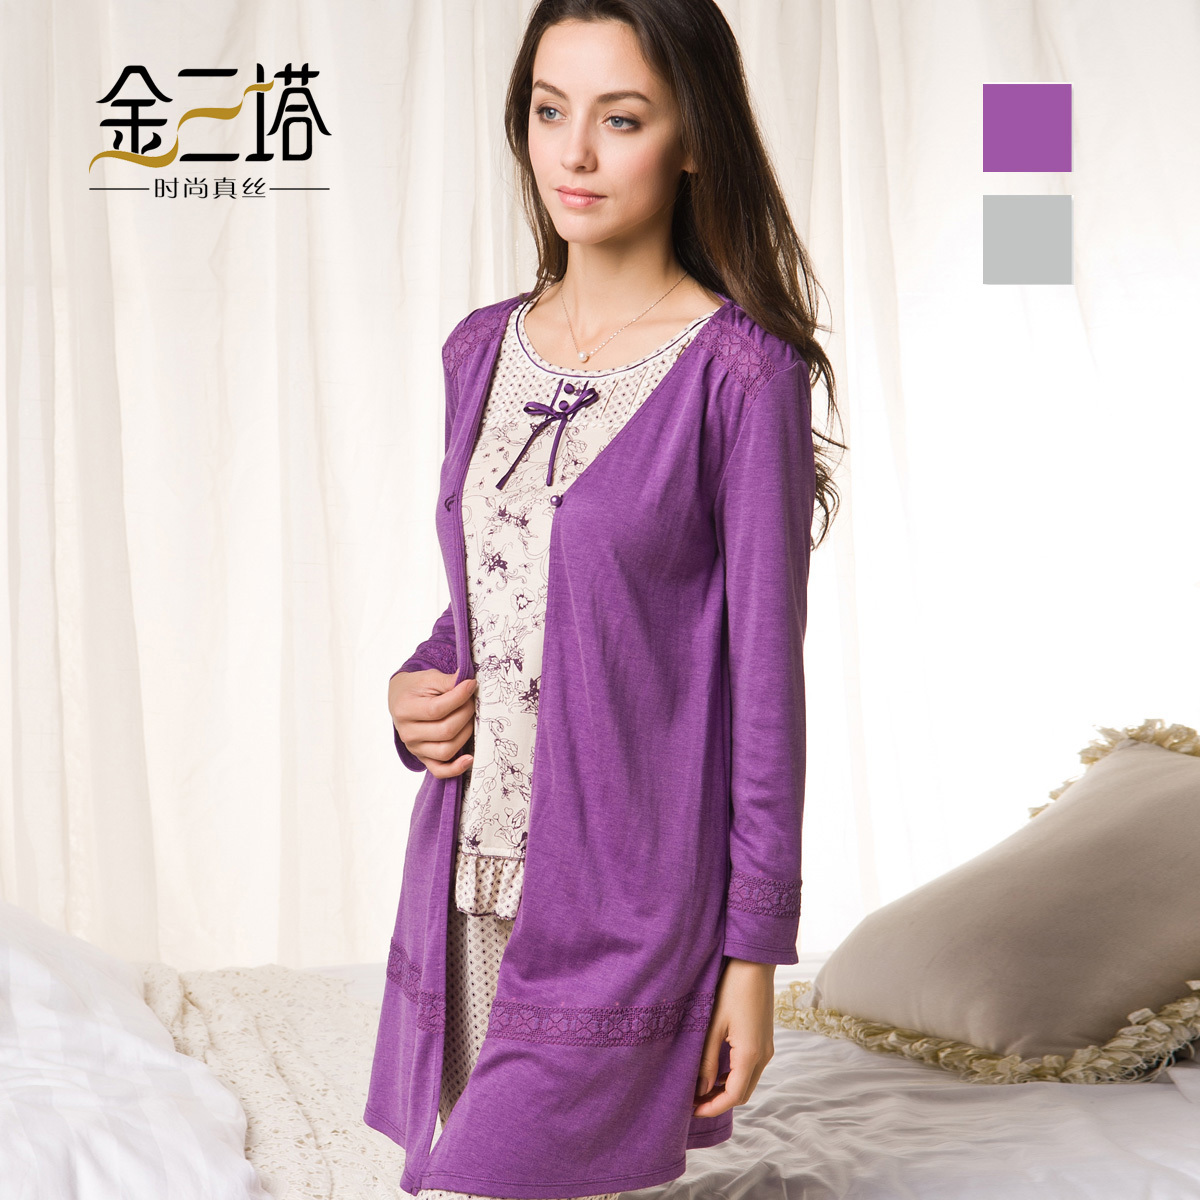 Silk floss knitted long-sleeve cape style top air conditioning shirt